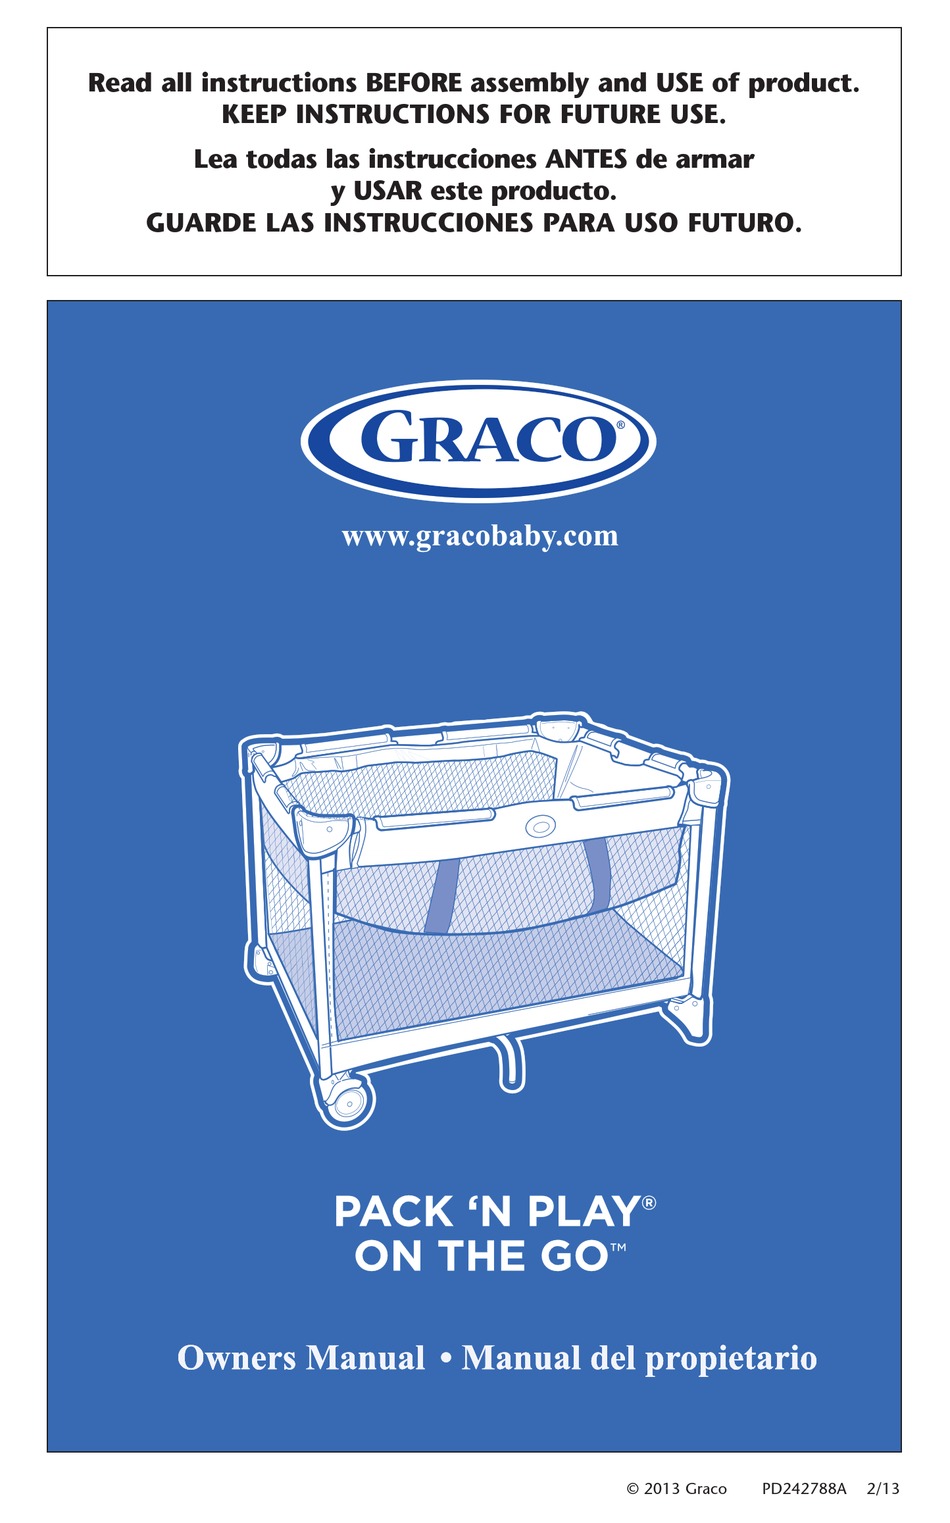 graco pack n play on the go instructions